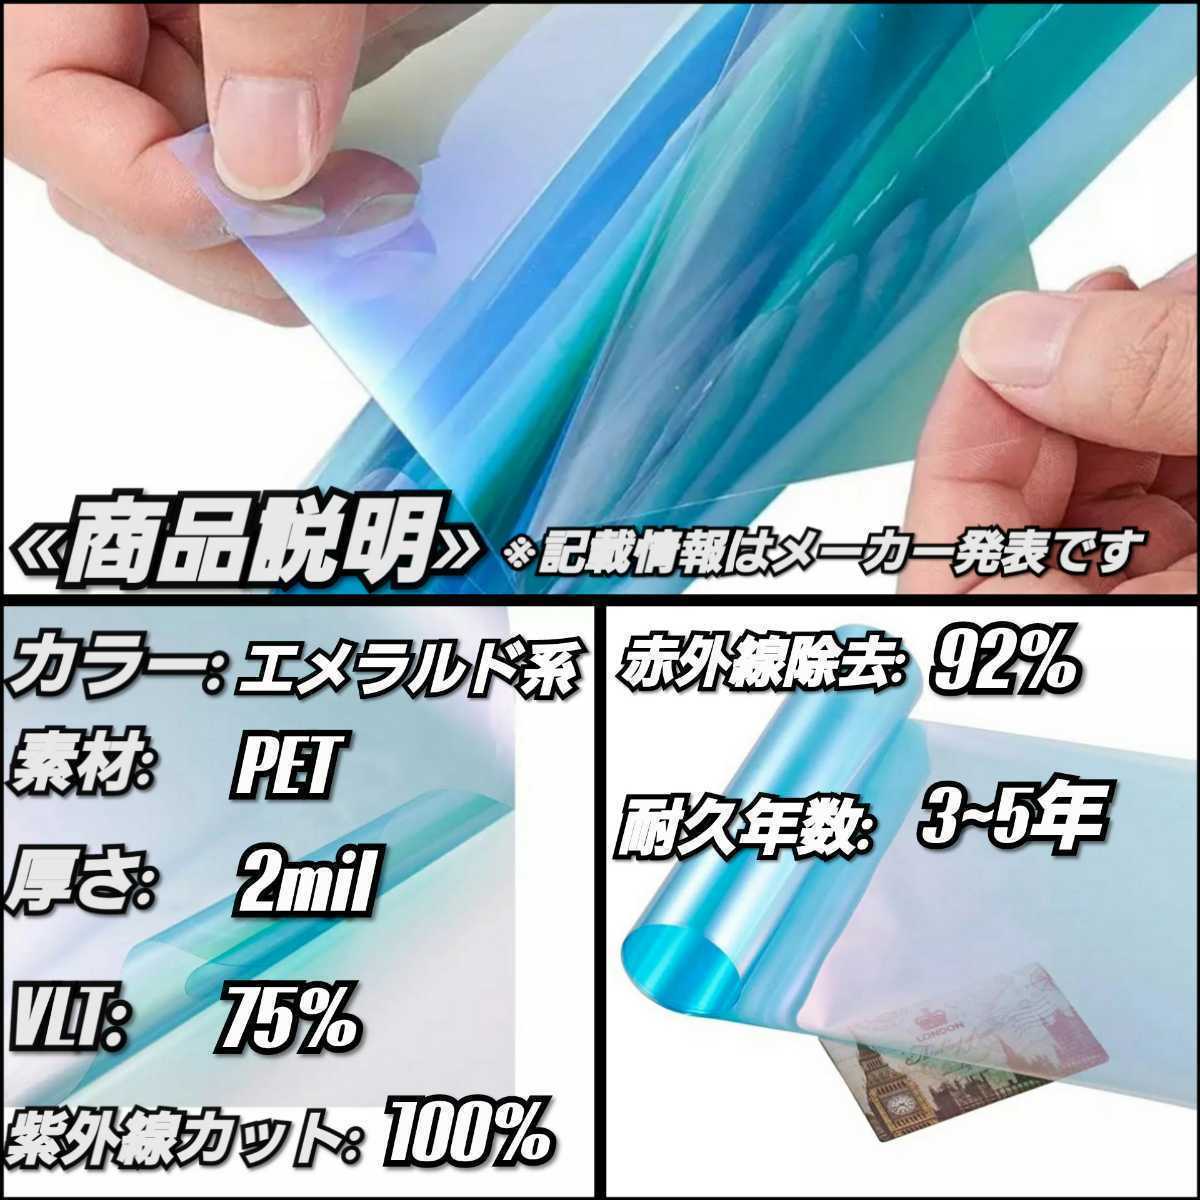 {1 point only!!} window film ~. sphere .....~ color smoke film emerald series privacy protection length 50cm× width 120cm 2 sheets insertion 